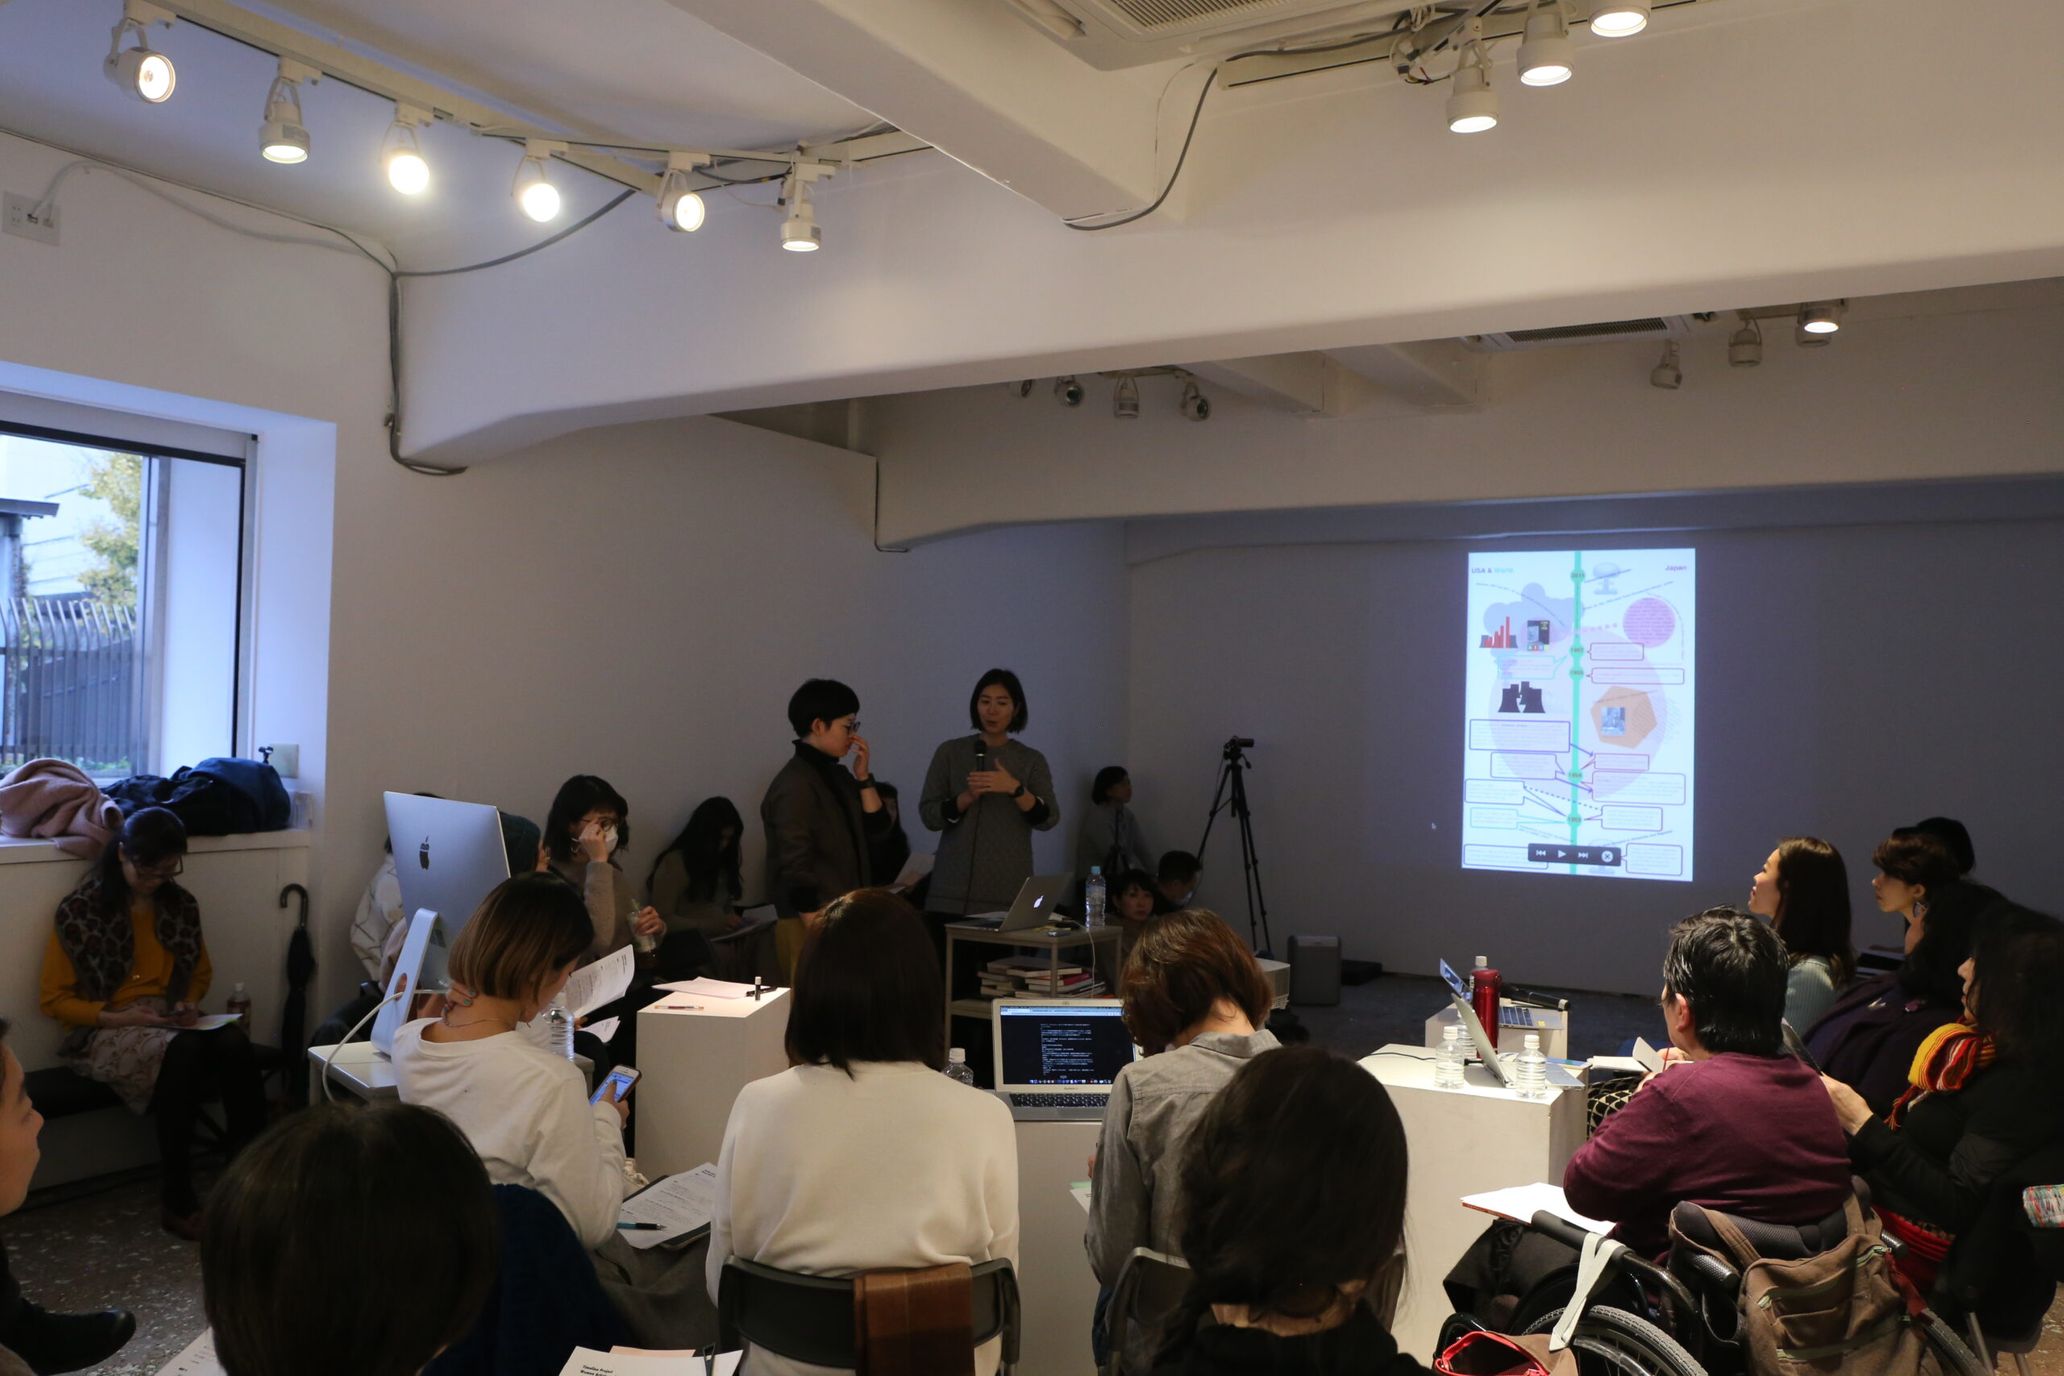 Events held at TOKAS Hongo in 2019, Timeline Project “Women Artists and History” Photography bozzo, ©Tokyo Arts and Space Photography Aisuke Kondo